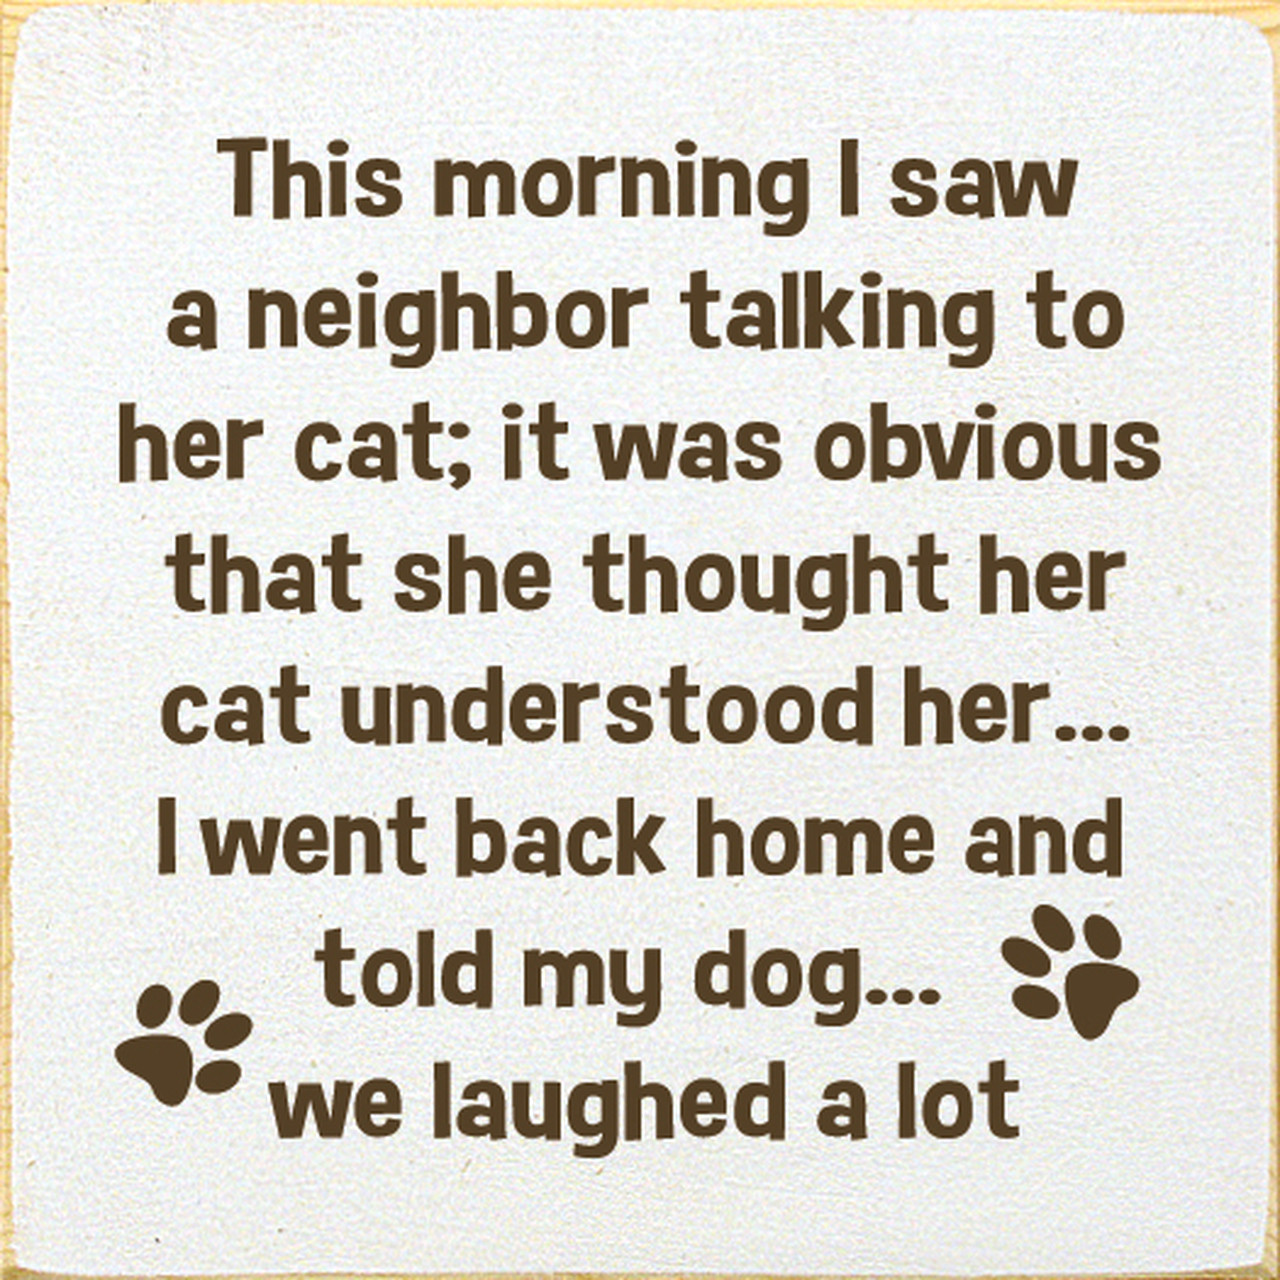 funny dog and cat quotes